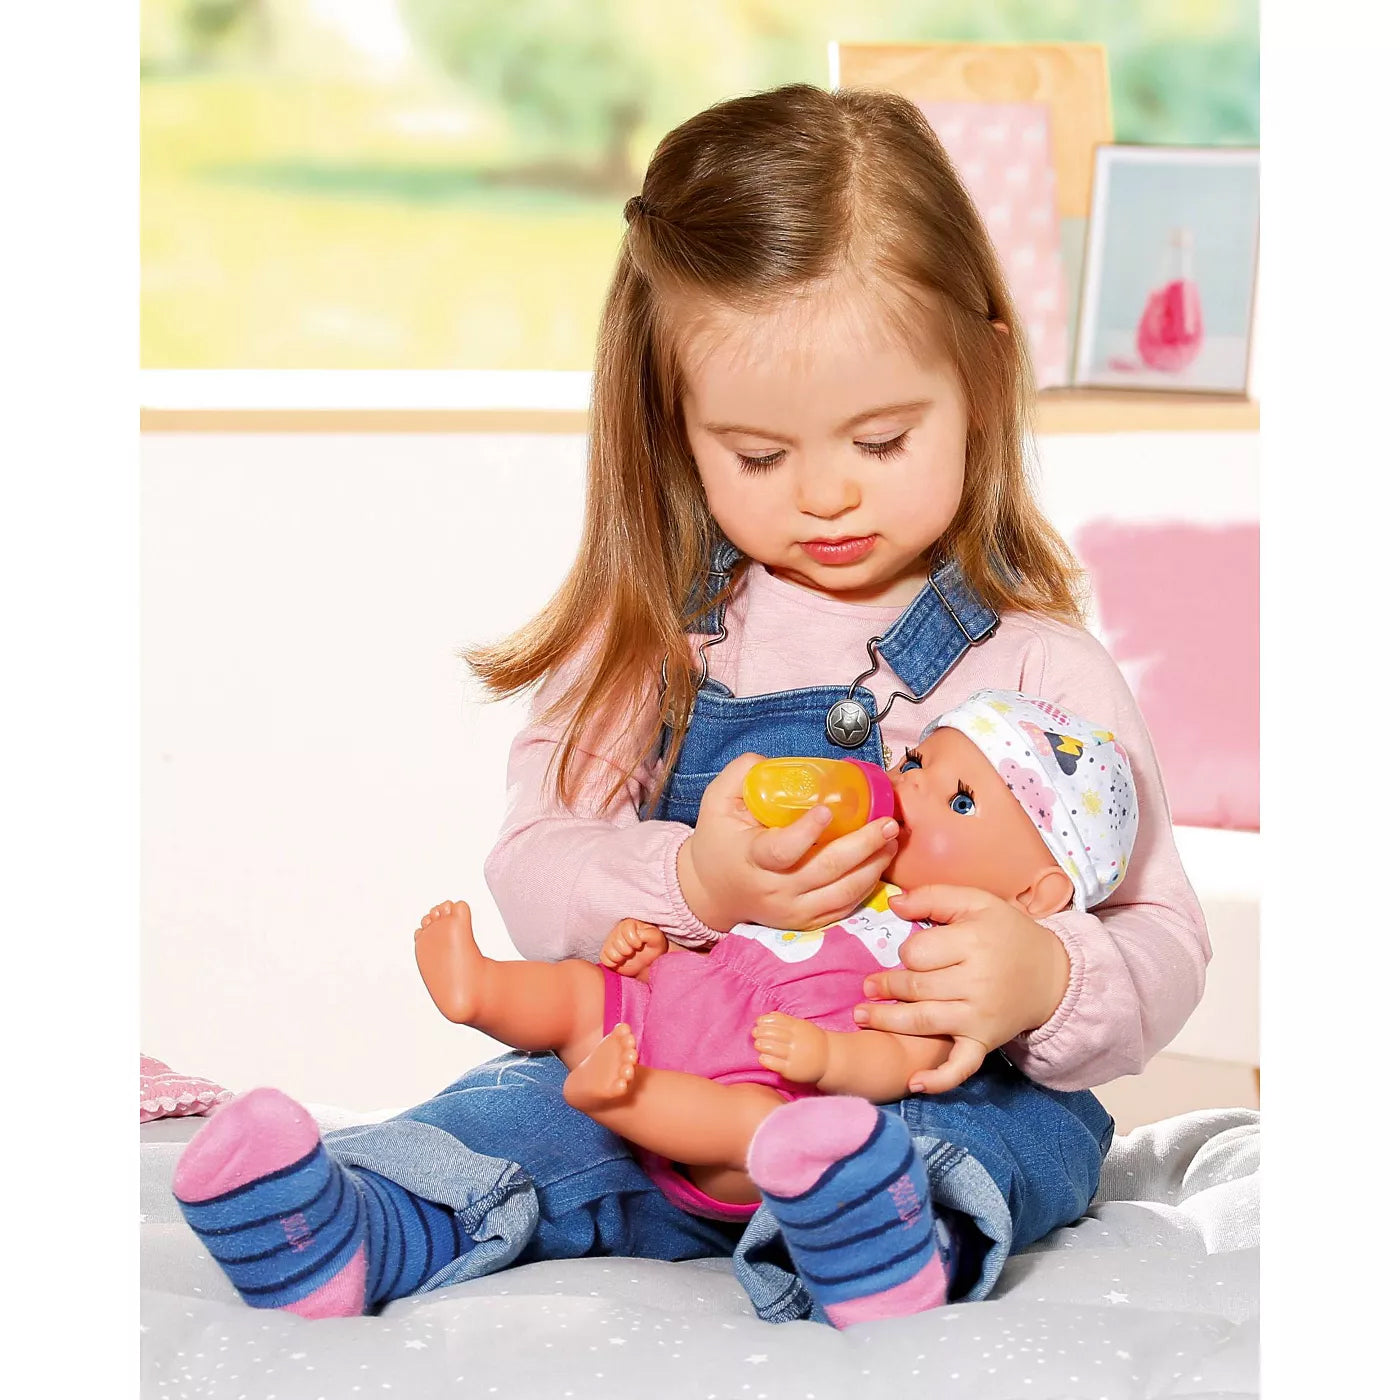 BABY Born Lil' Girl Baby Doll - Blue Eyes Pretend Play Doll - Great Gift Doll Playset Toy